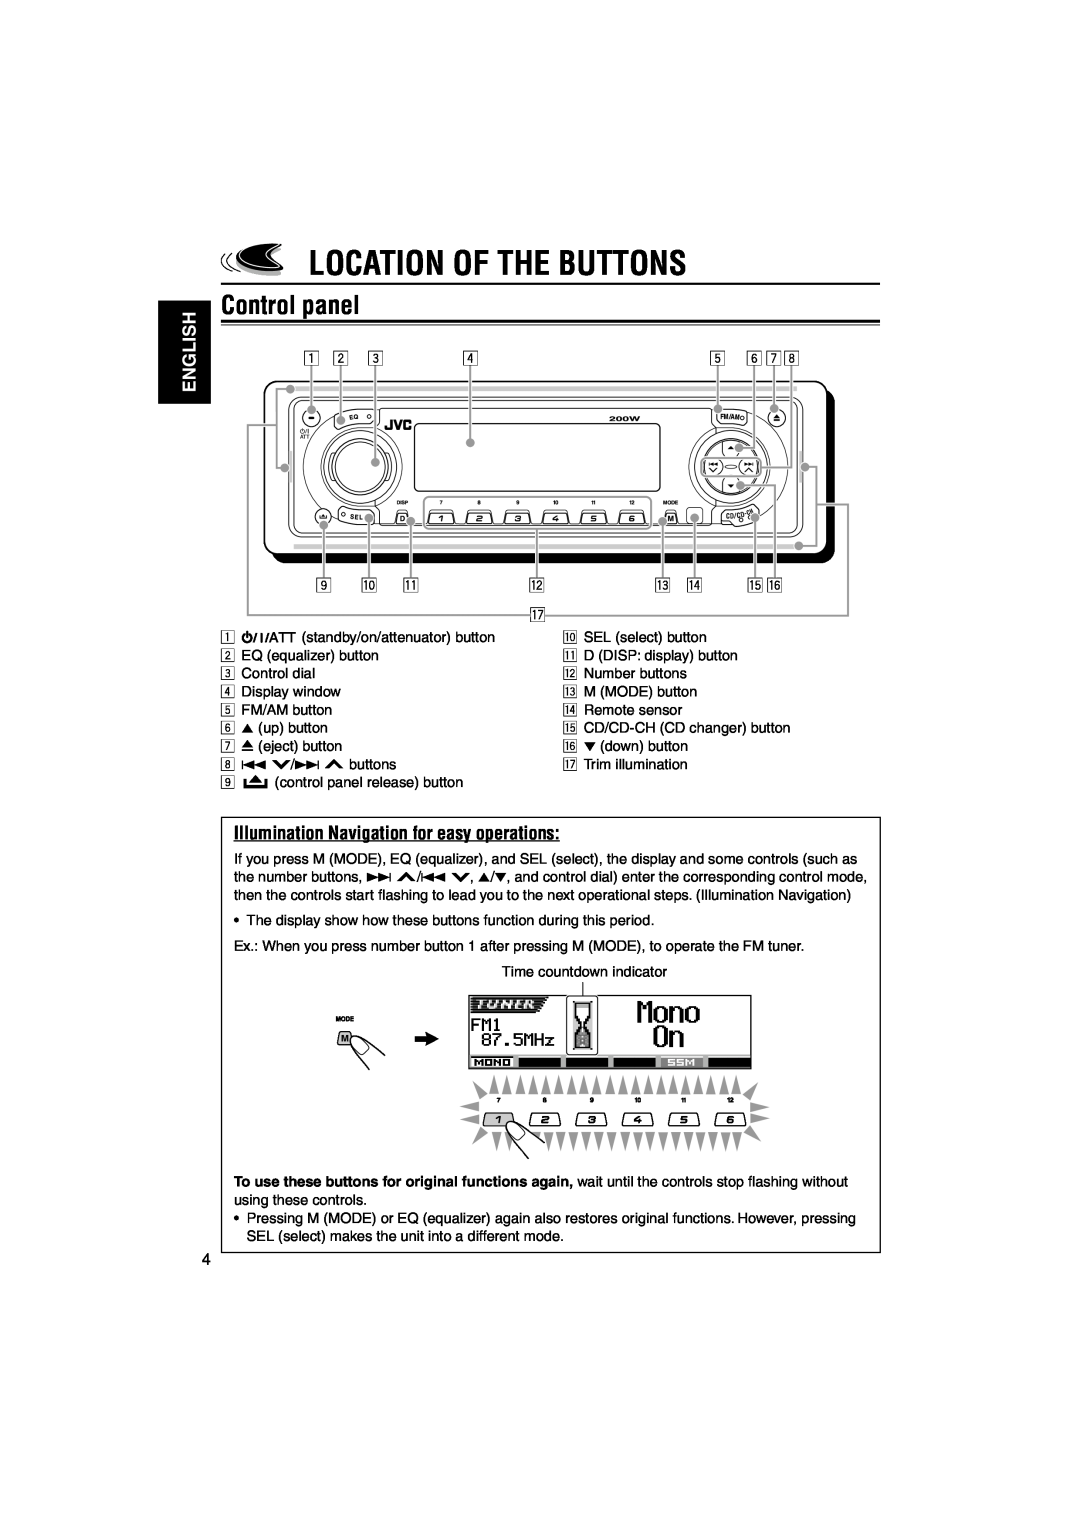 JVC KD-LH1150, KD-LH1100 manual Location Of The Buttons, Control panel, English, Illumination Navigation for easy operations 